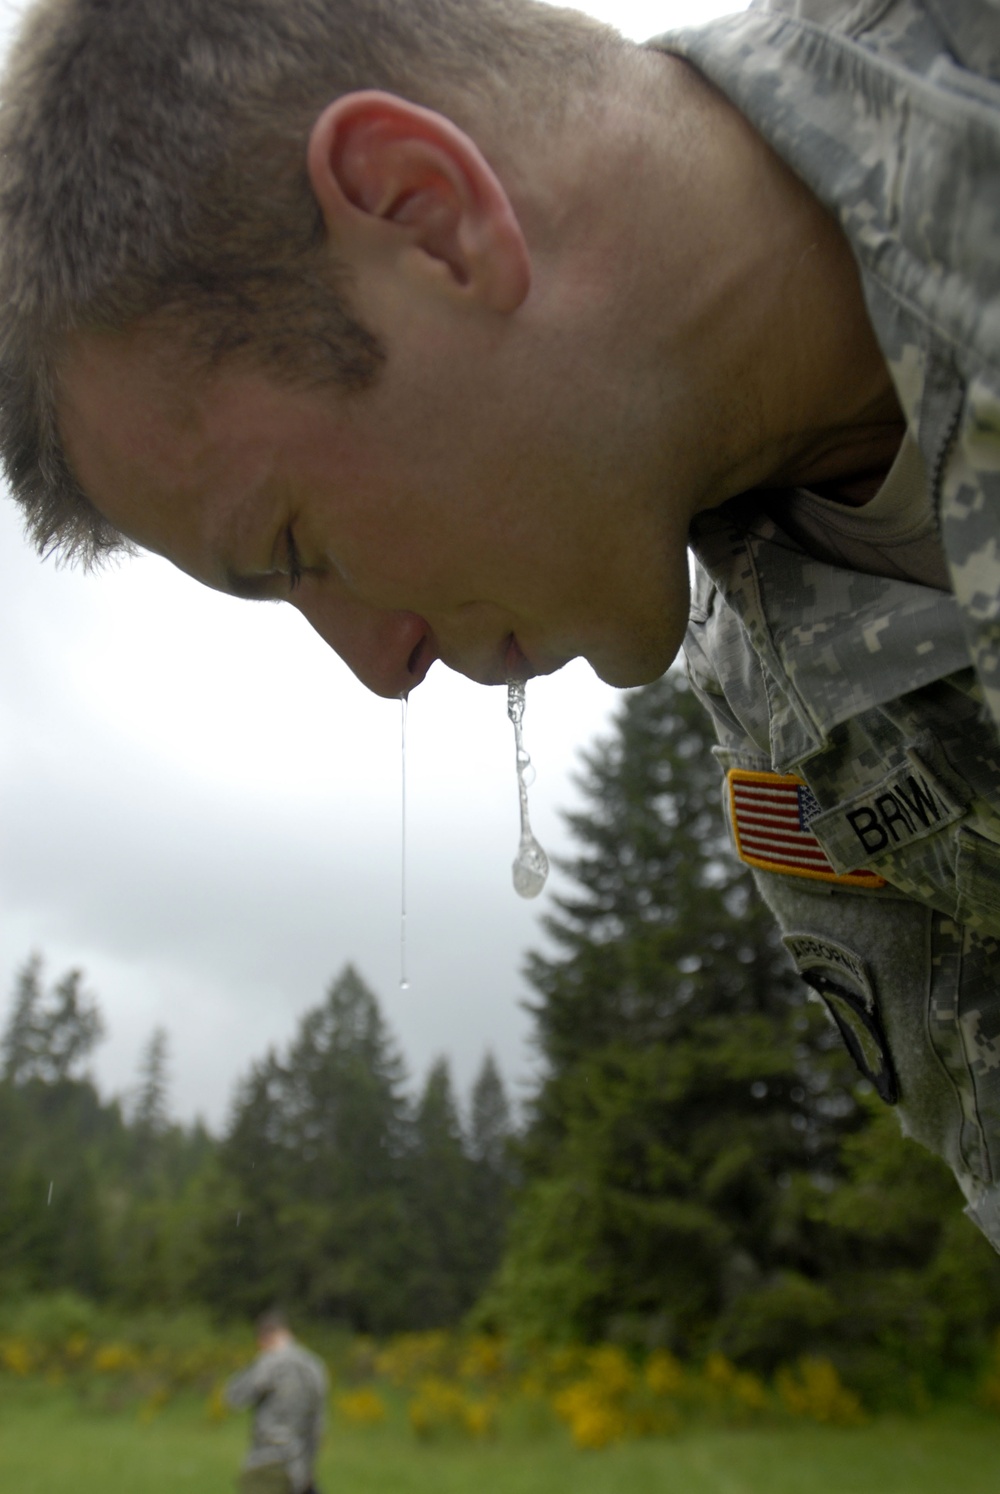 NBC training brings soldiers to tears